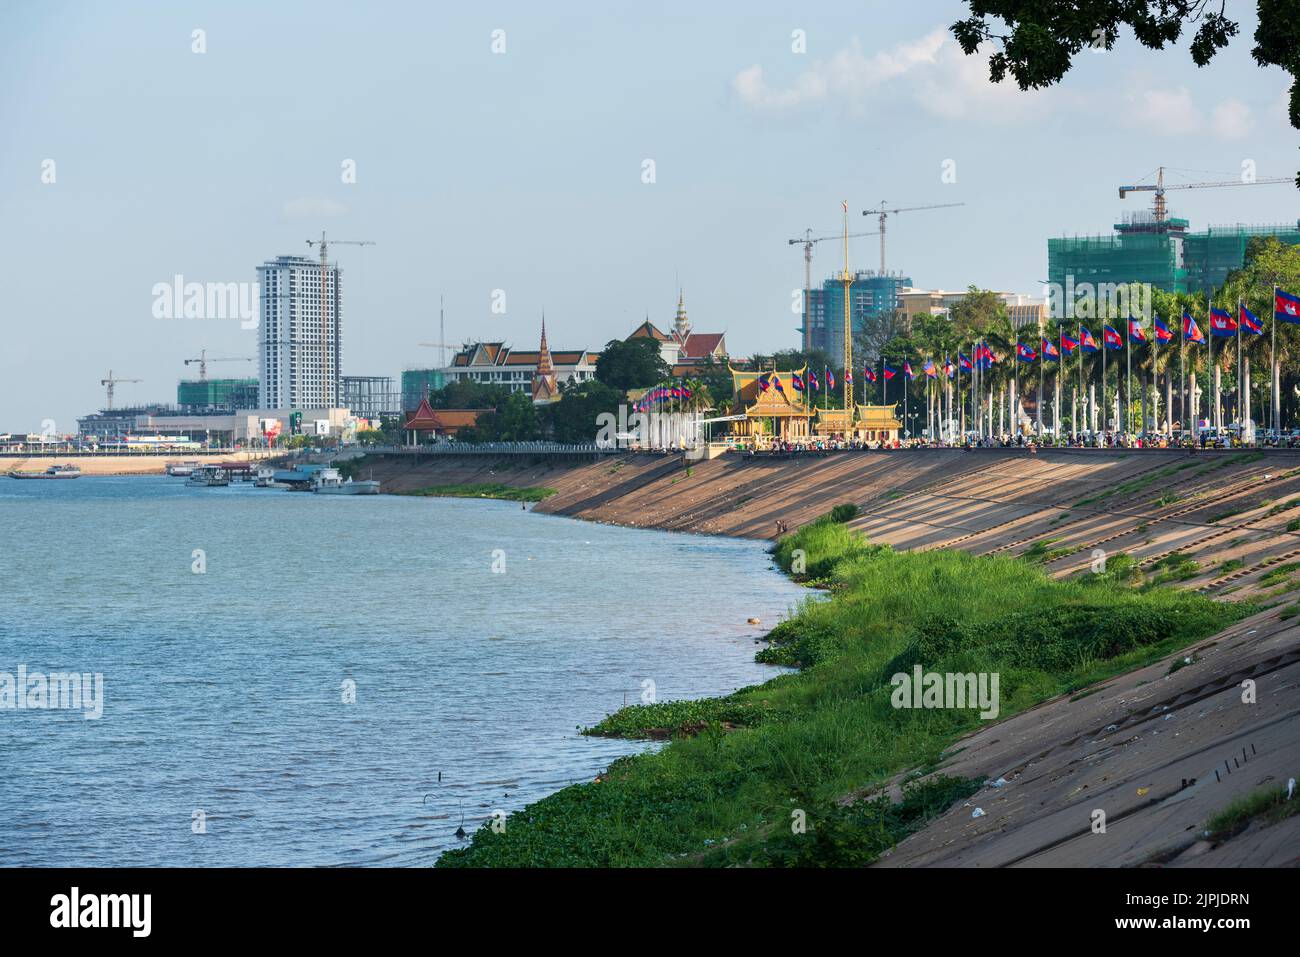 Cambodian capital Phnom Penh. Mekong river and city center Stock Photo